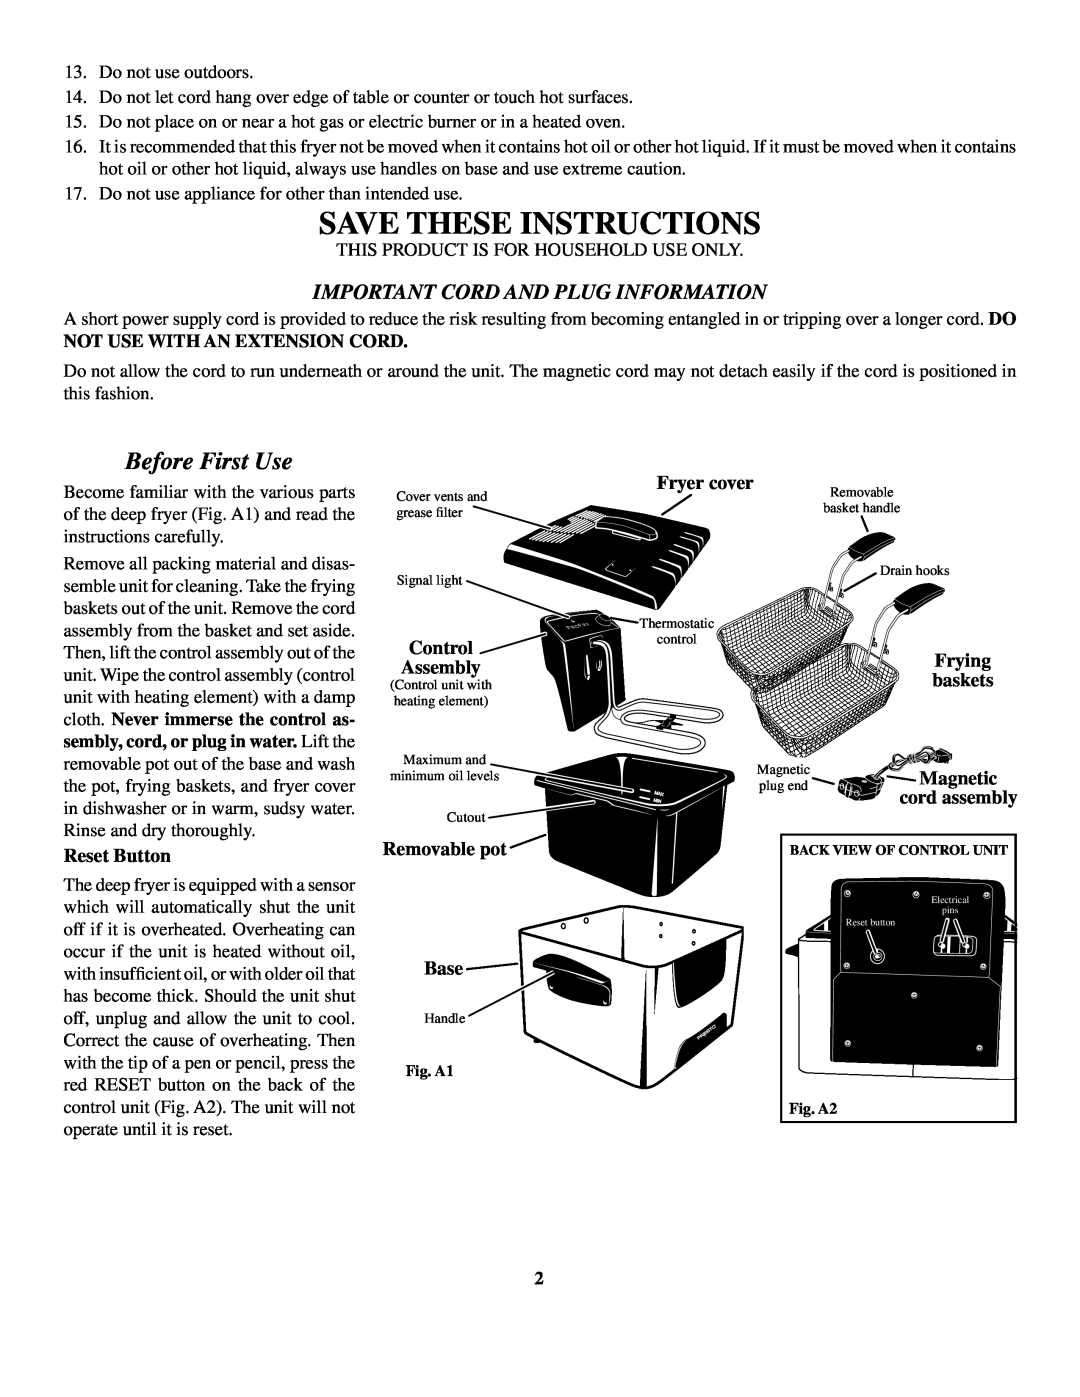 Presto Dual Basket ProFry Save These Instructions, Before First Use, Important Cord and Plug Information, Fryer cover 